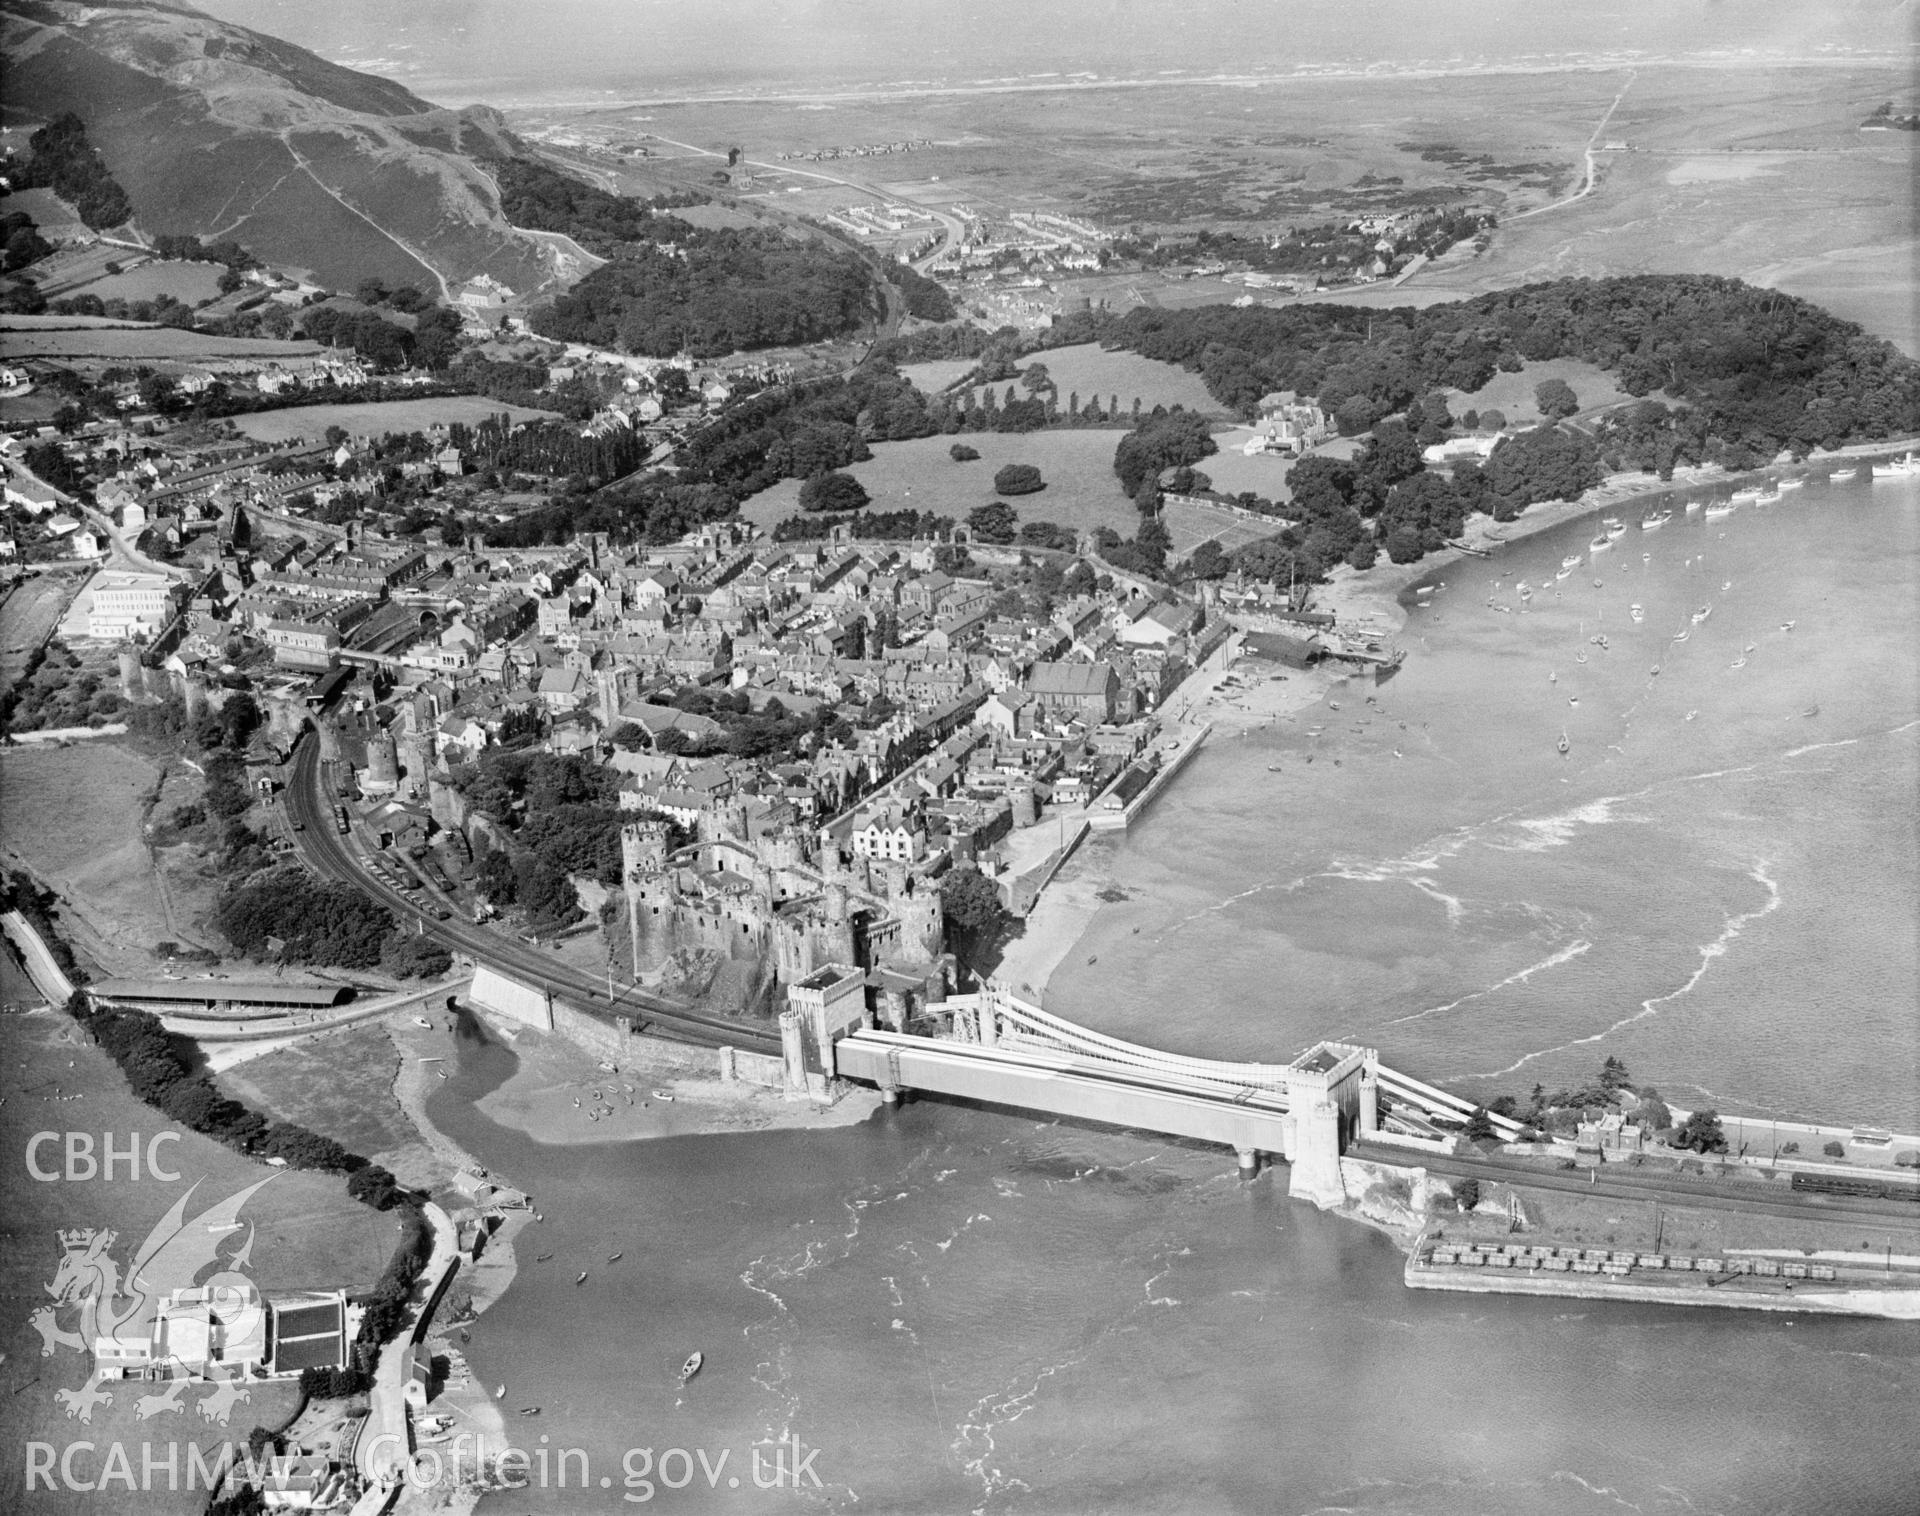 General view of Conwy showing castle and mussel purification plant in foreground, oblique aerial view. 5?x4? black and white glass plate negative.